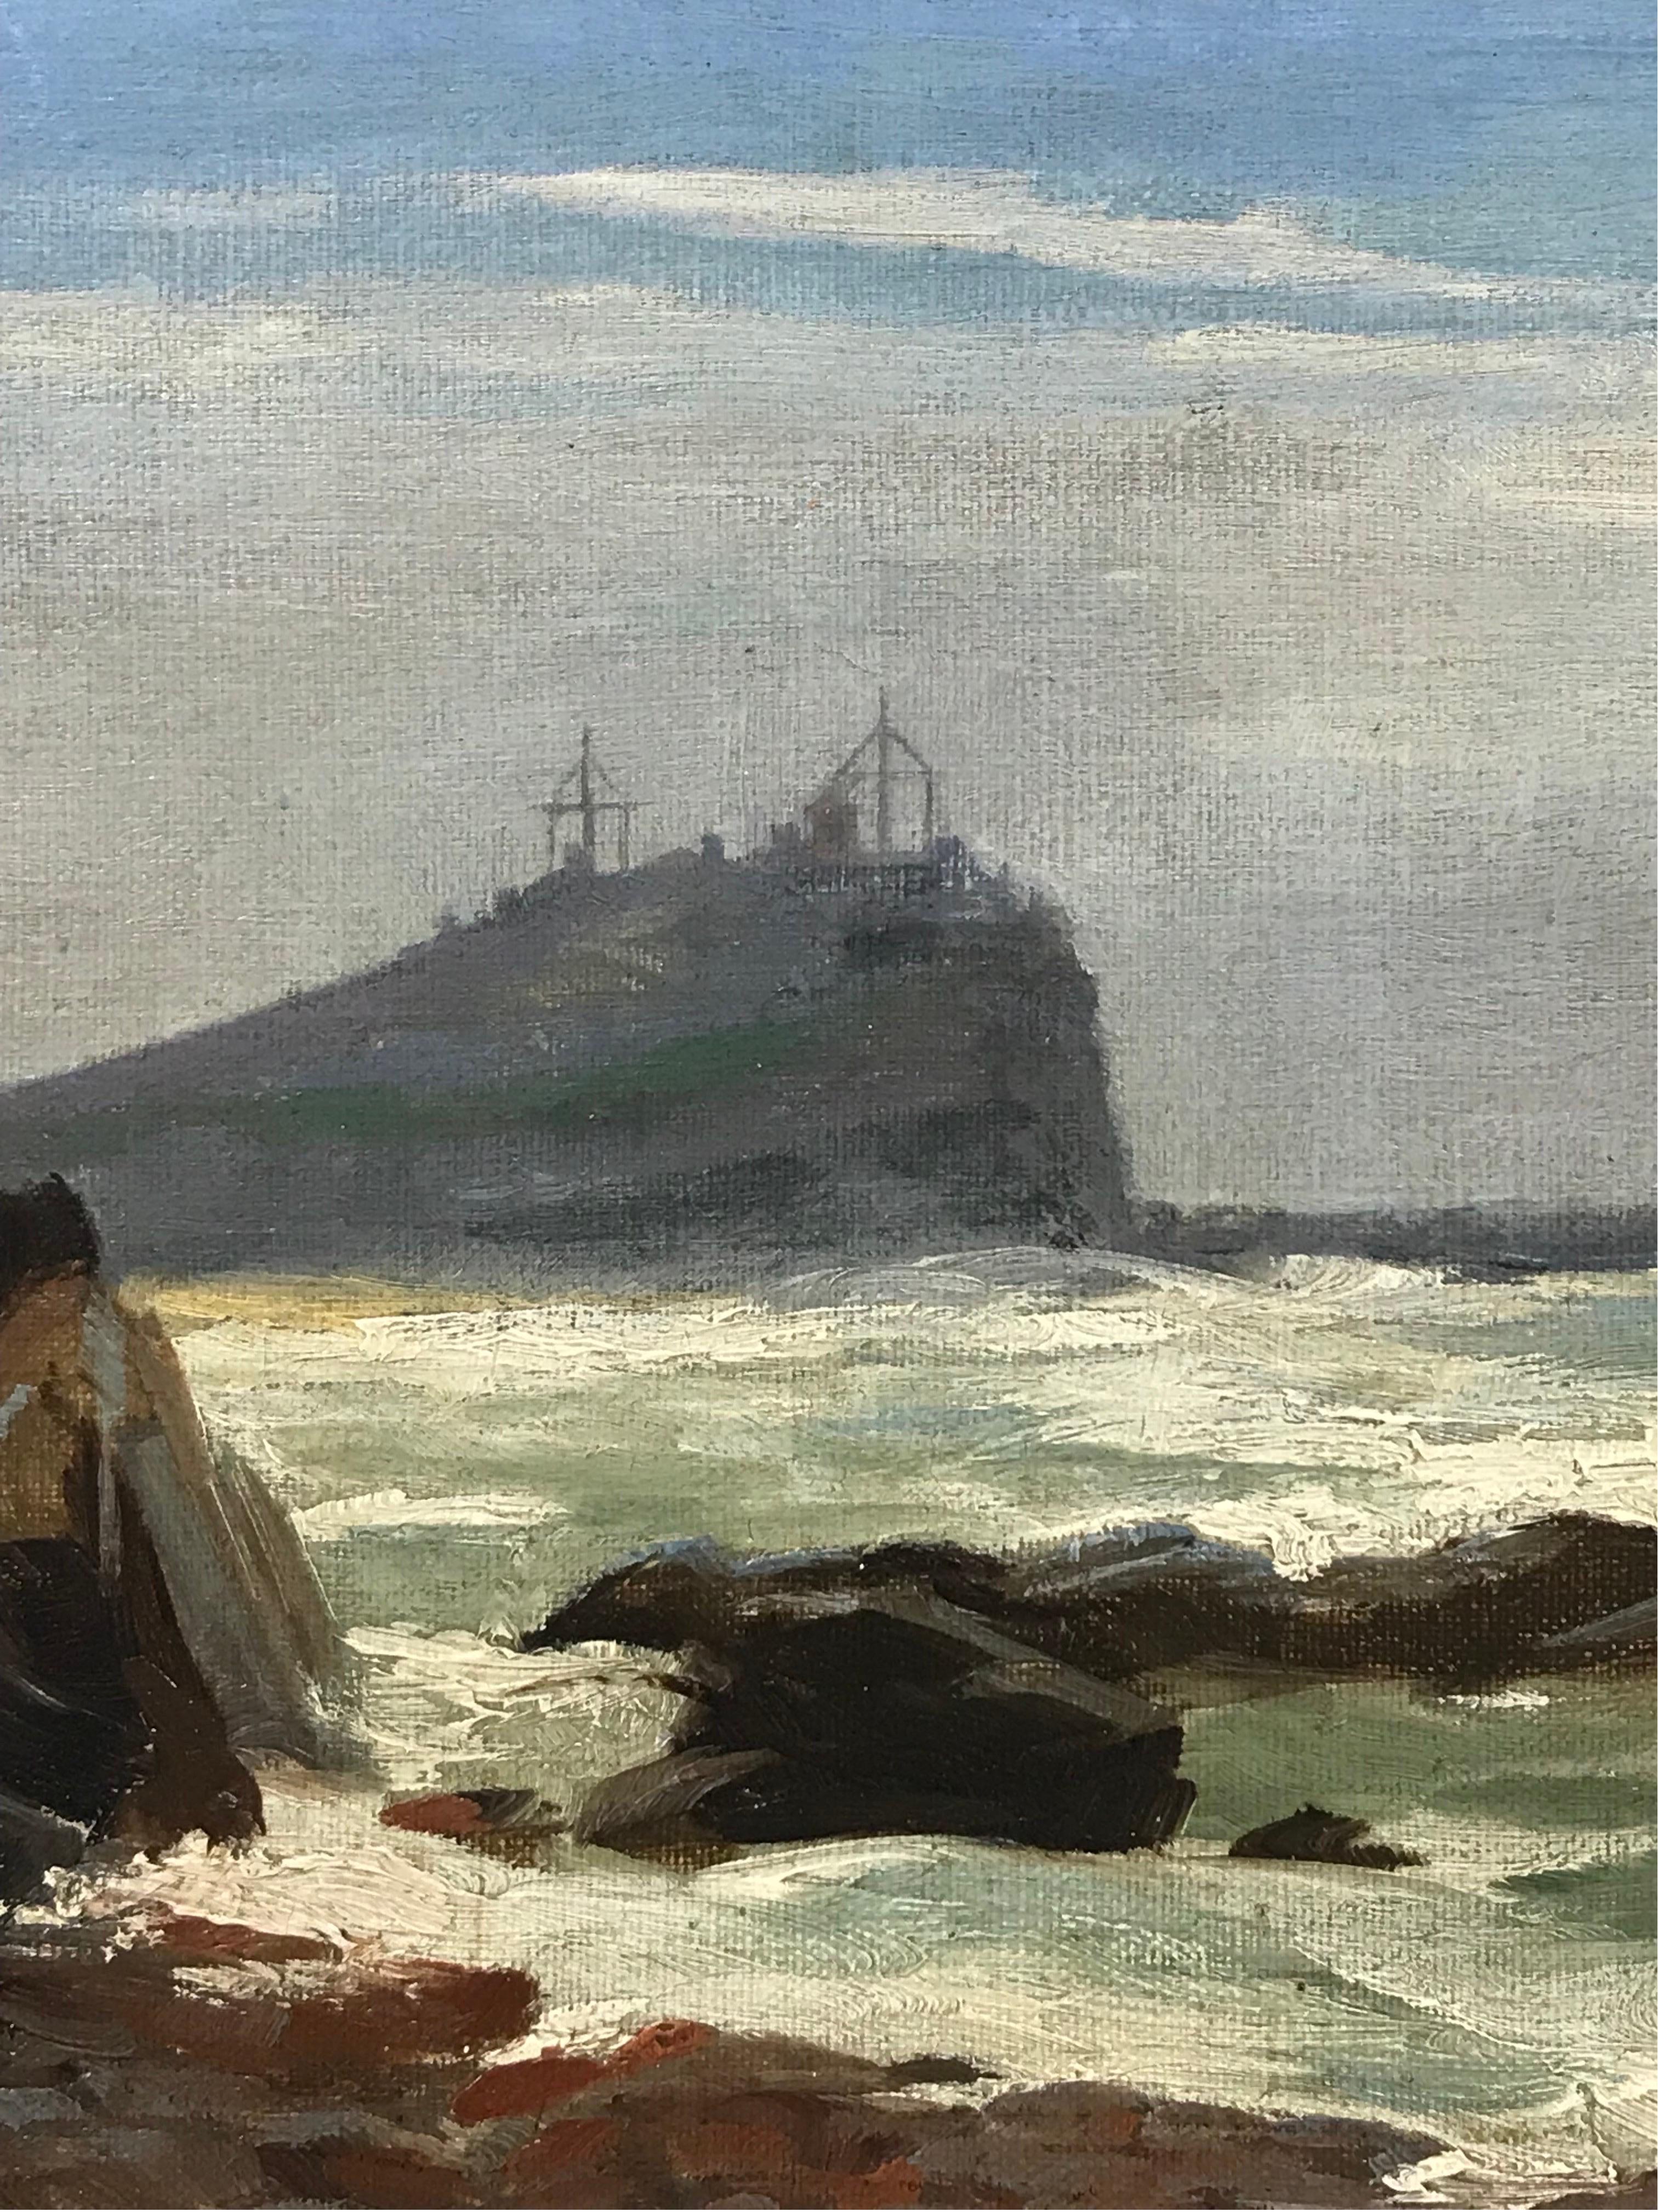 Cornish Coastal Seascape with Tin Mines overlooking Cliffs, signed English Oil - Victorian Painting by 1920's Cornish